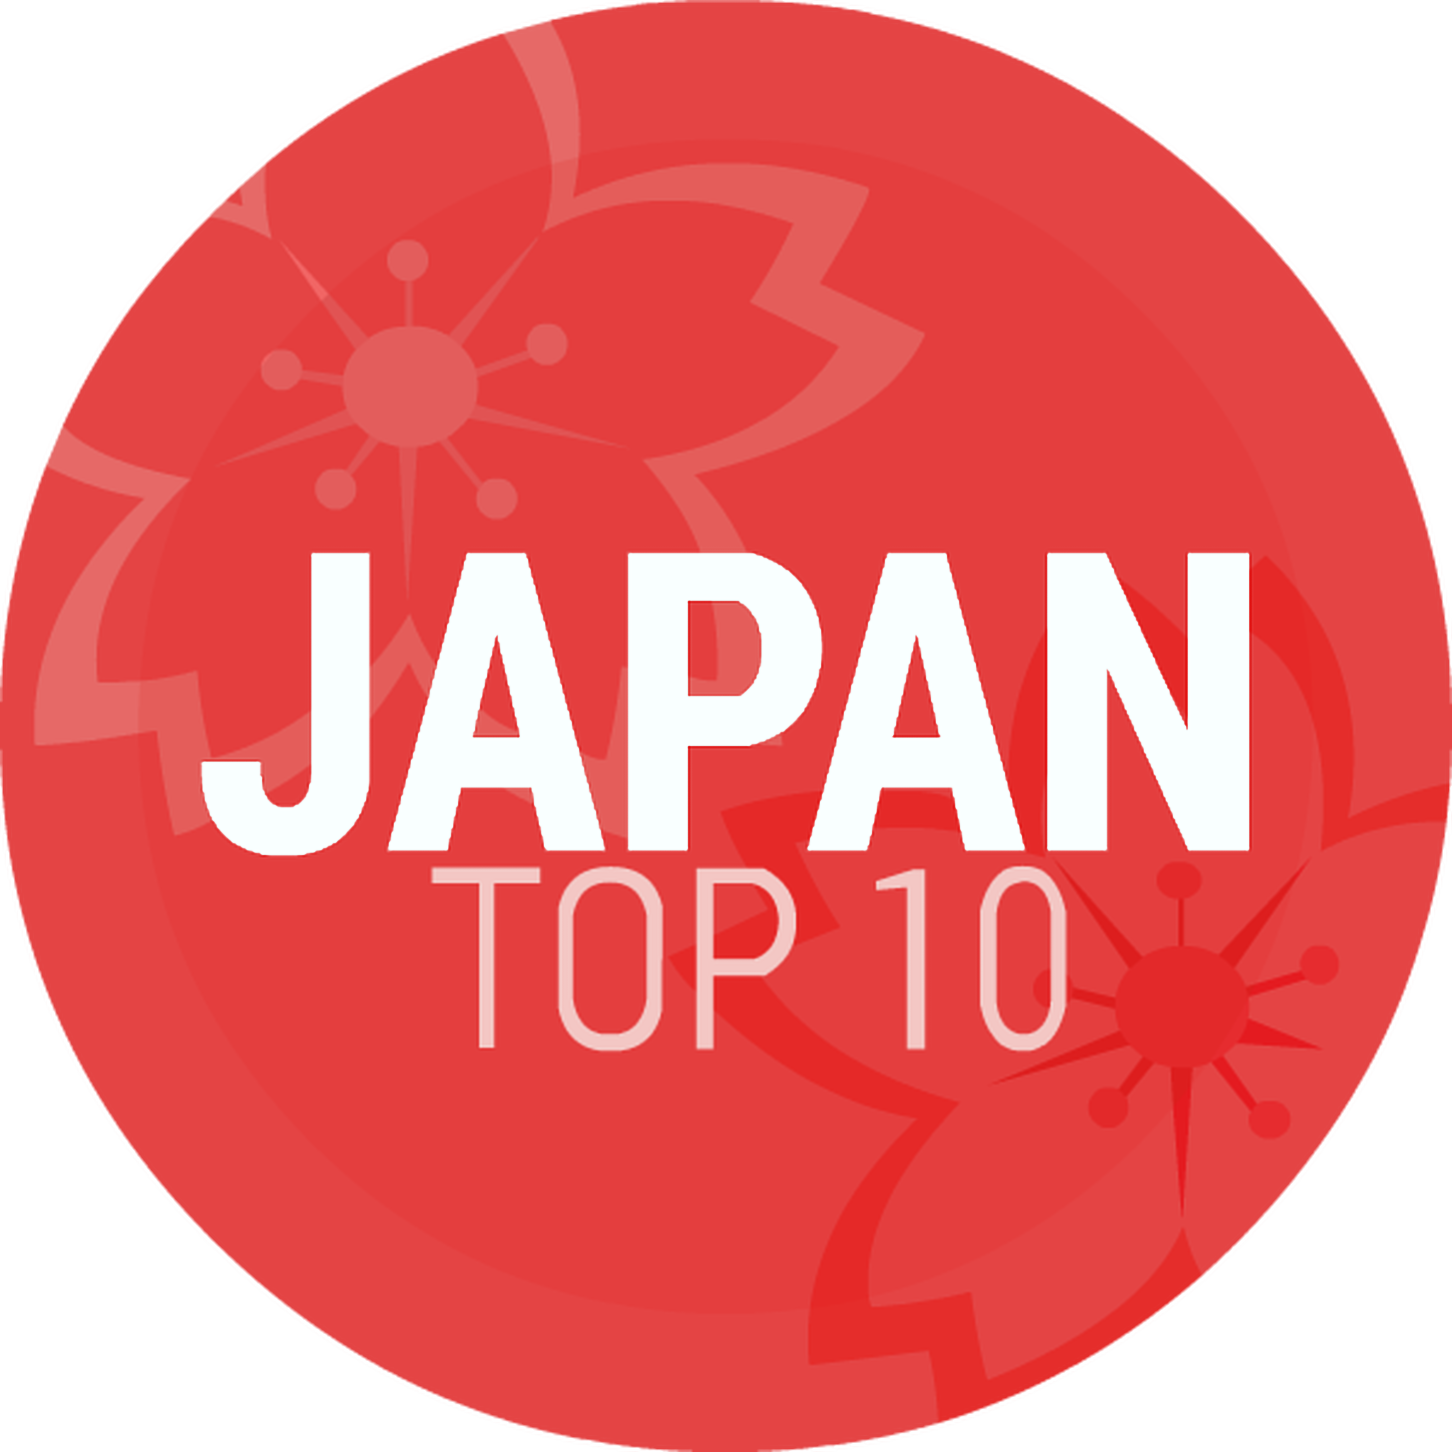 Episode 182: Japan Top 10 Mid May 2017 Countdown